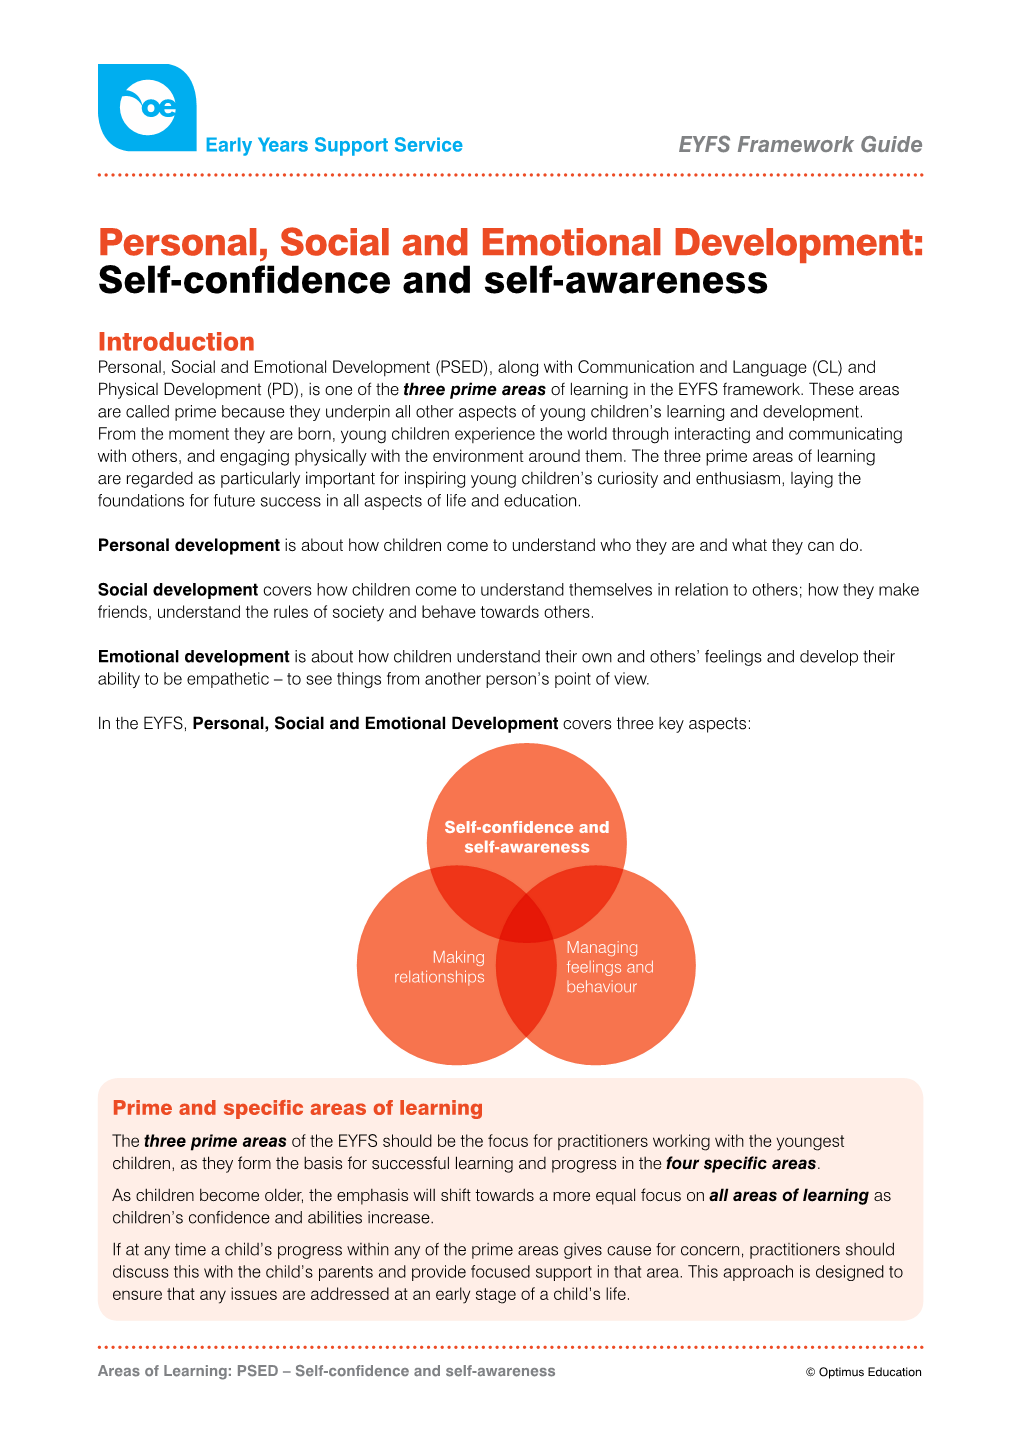 Personal, Social and Emotional Development: Self-Confidence and Self-Awareness